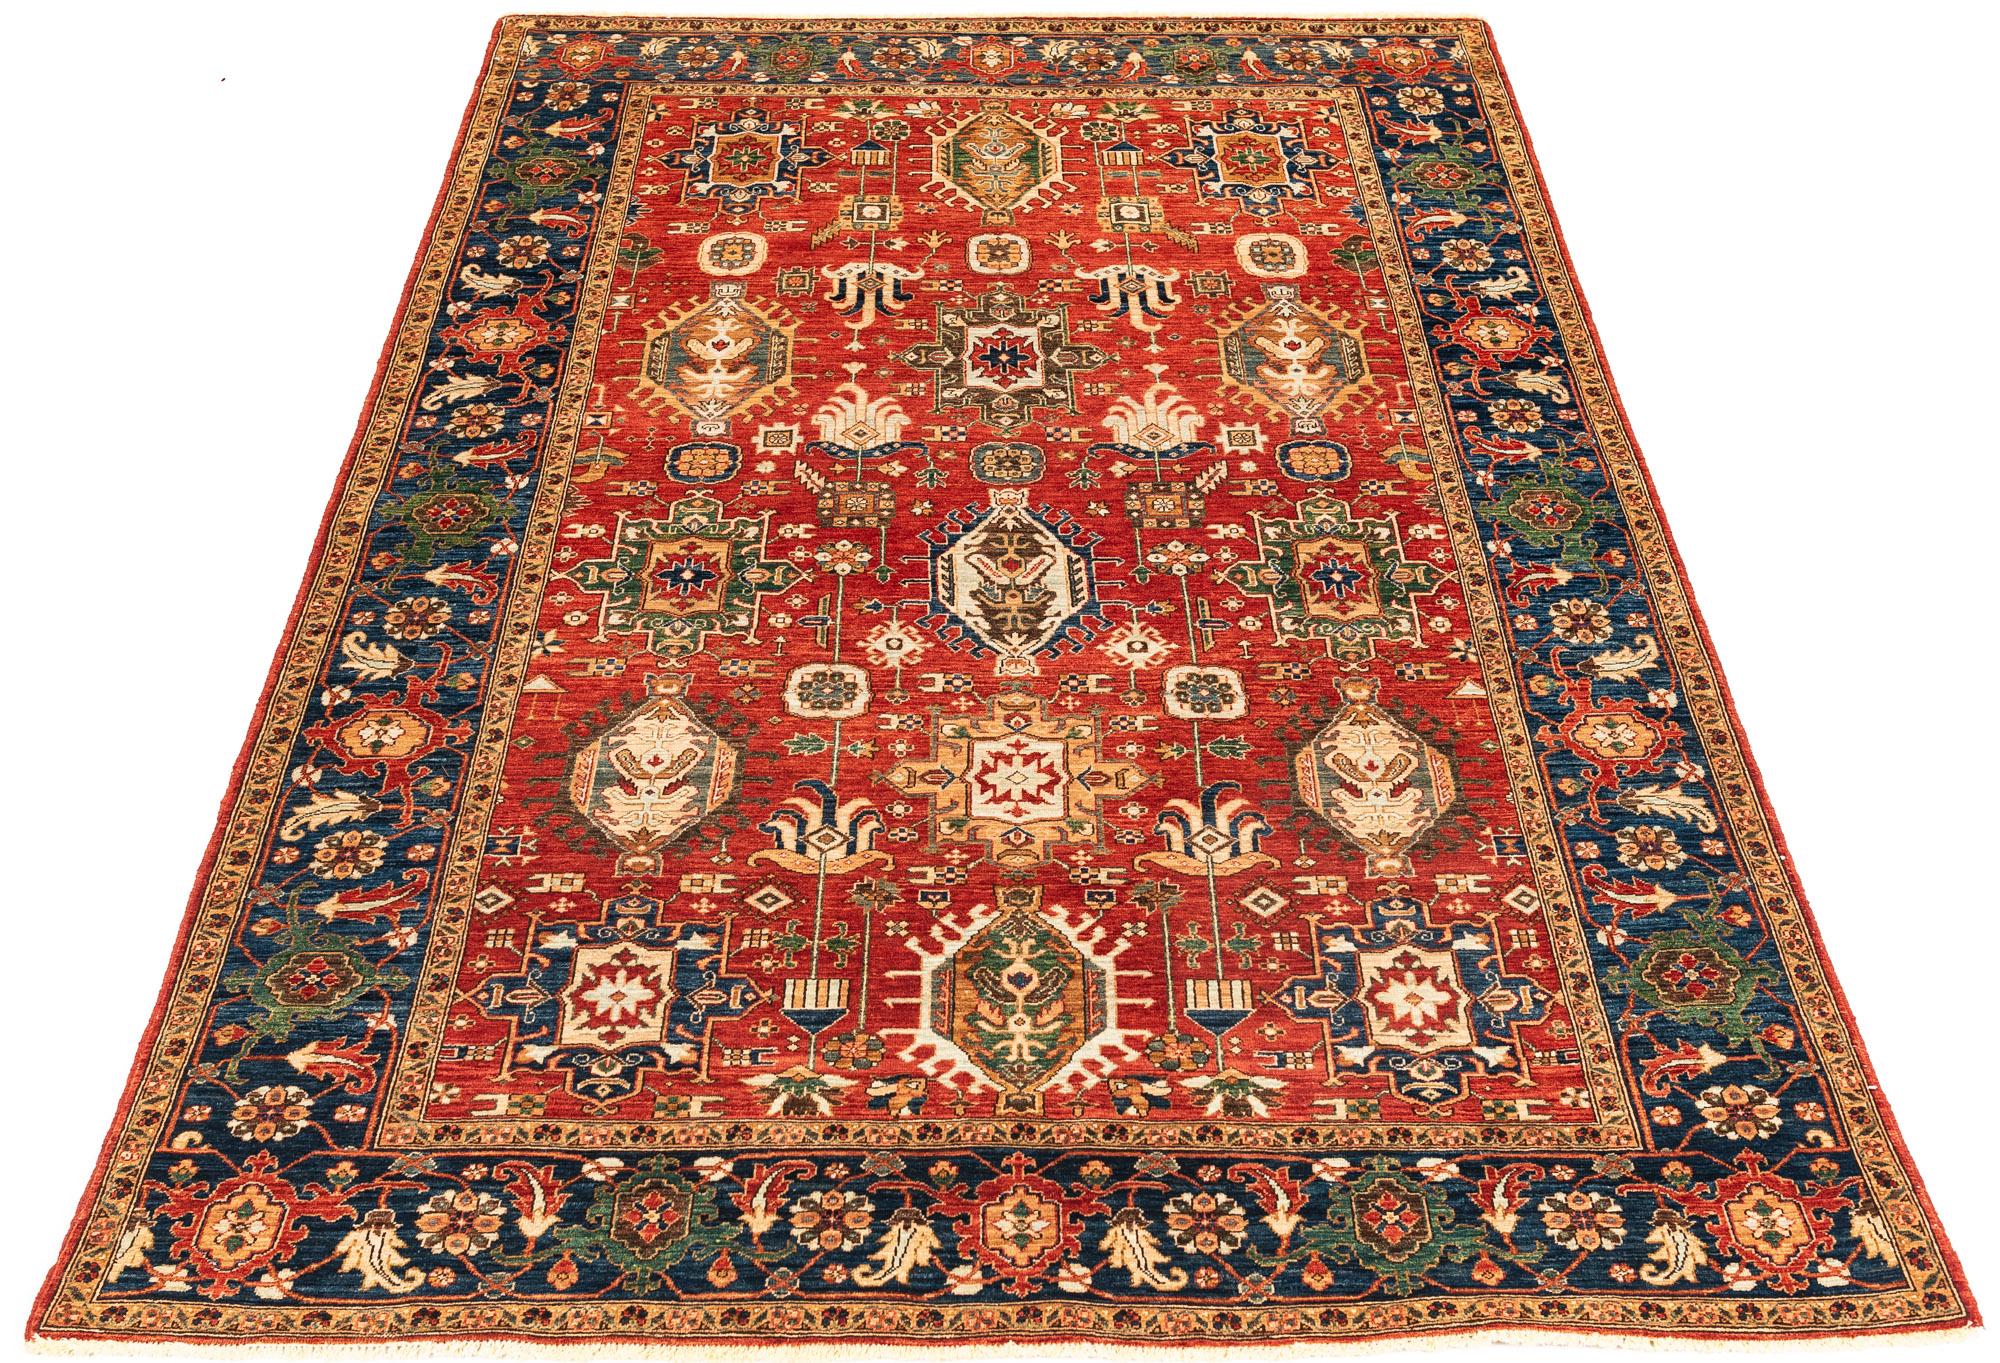 Hand-Knotted New Afghan Karadja Transitional Rug in Rust, Blue, Yellow, and Cream